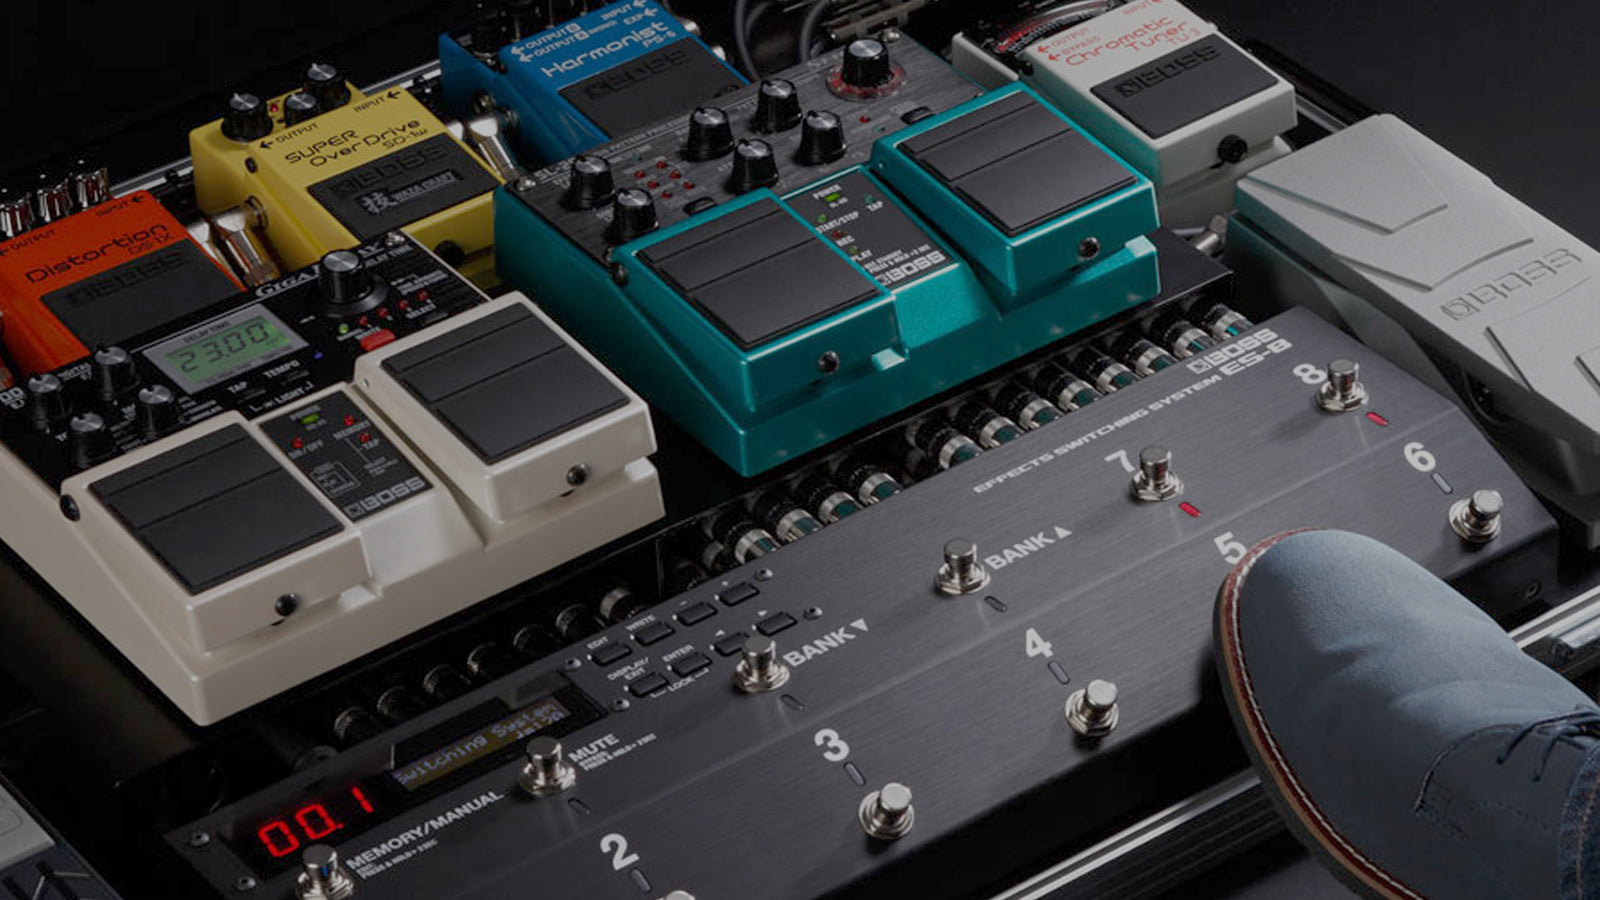 A Boss pedalboard with a foot pressing a pedal